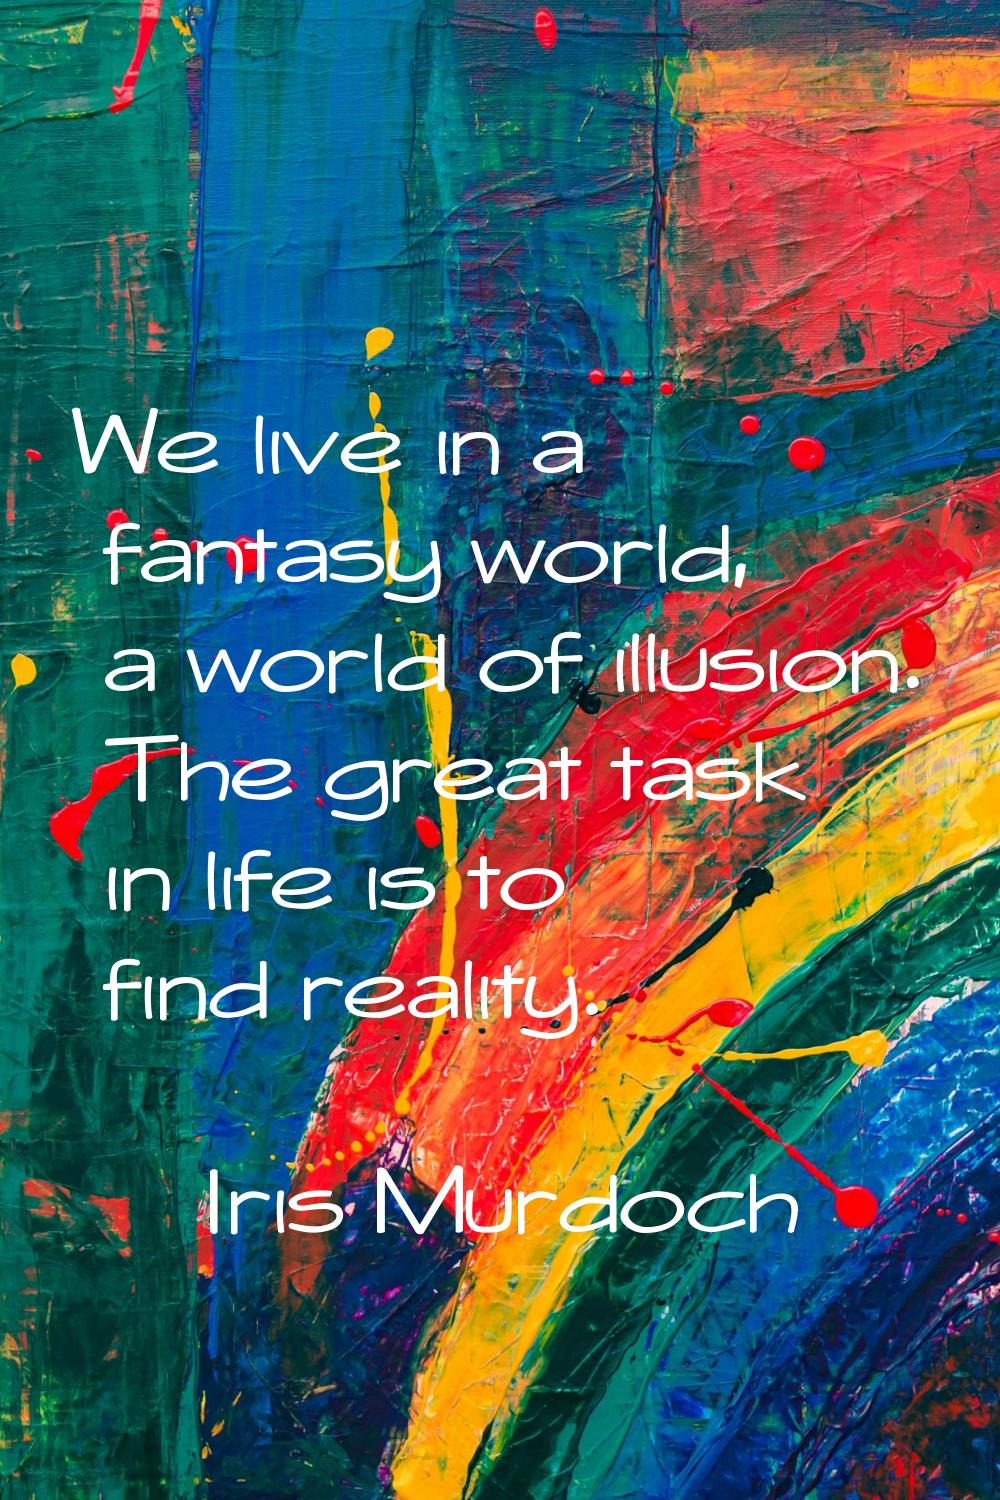 We live in a fantasy world, a world of illusion. The great task in life is to find reality.